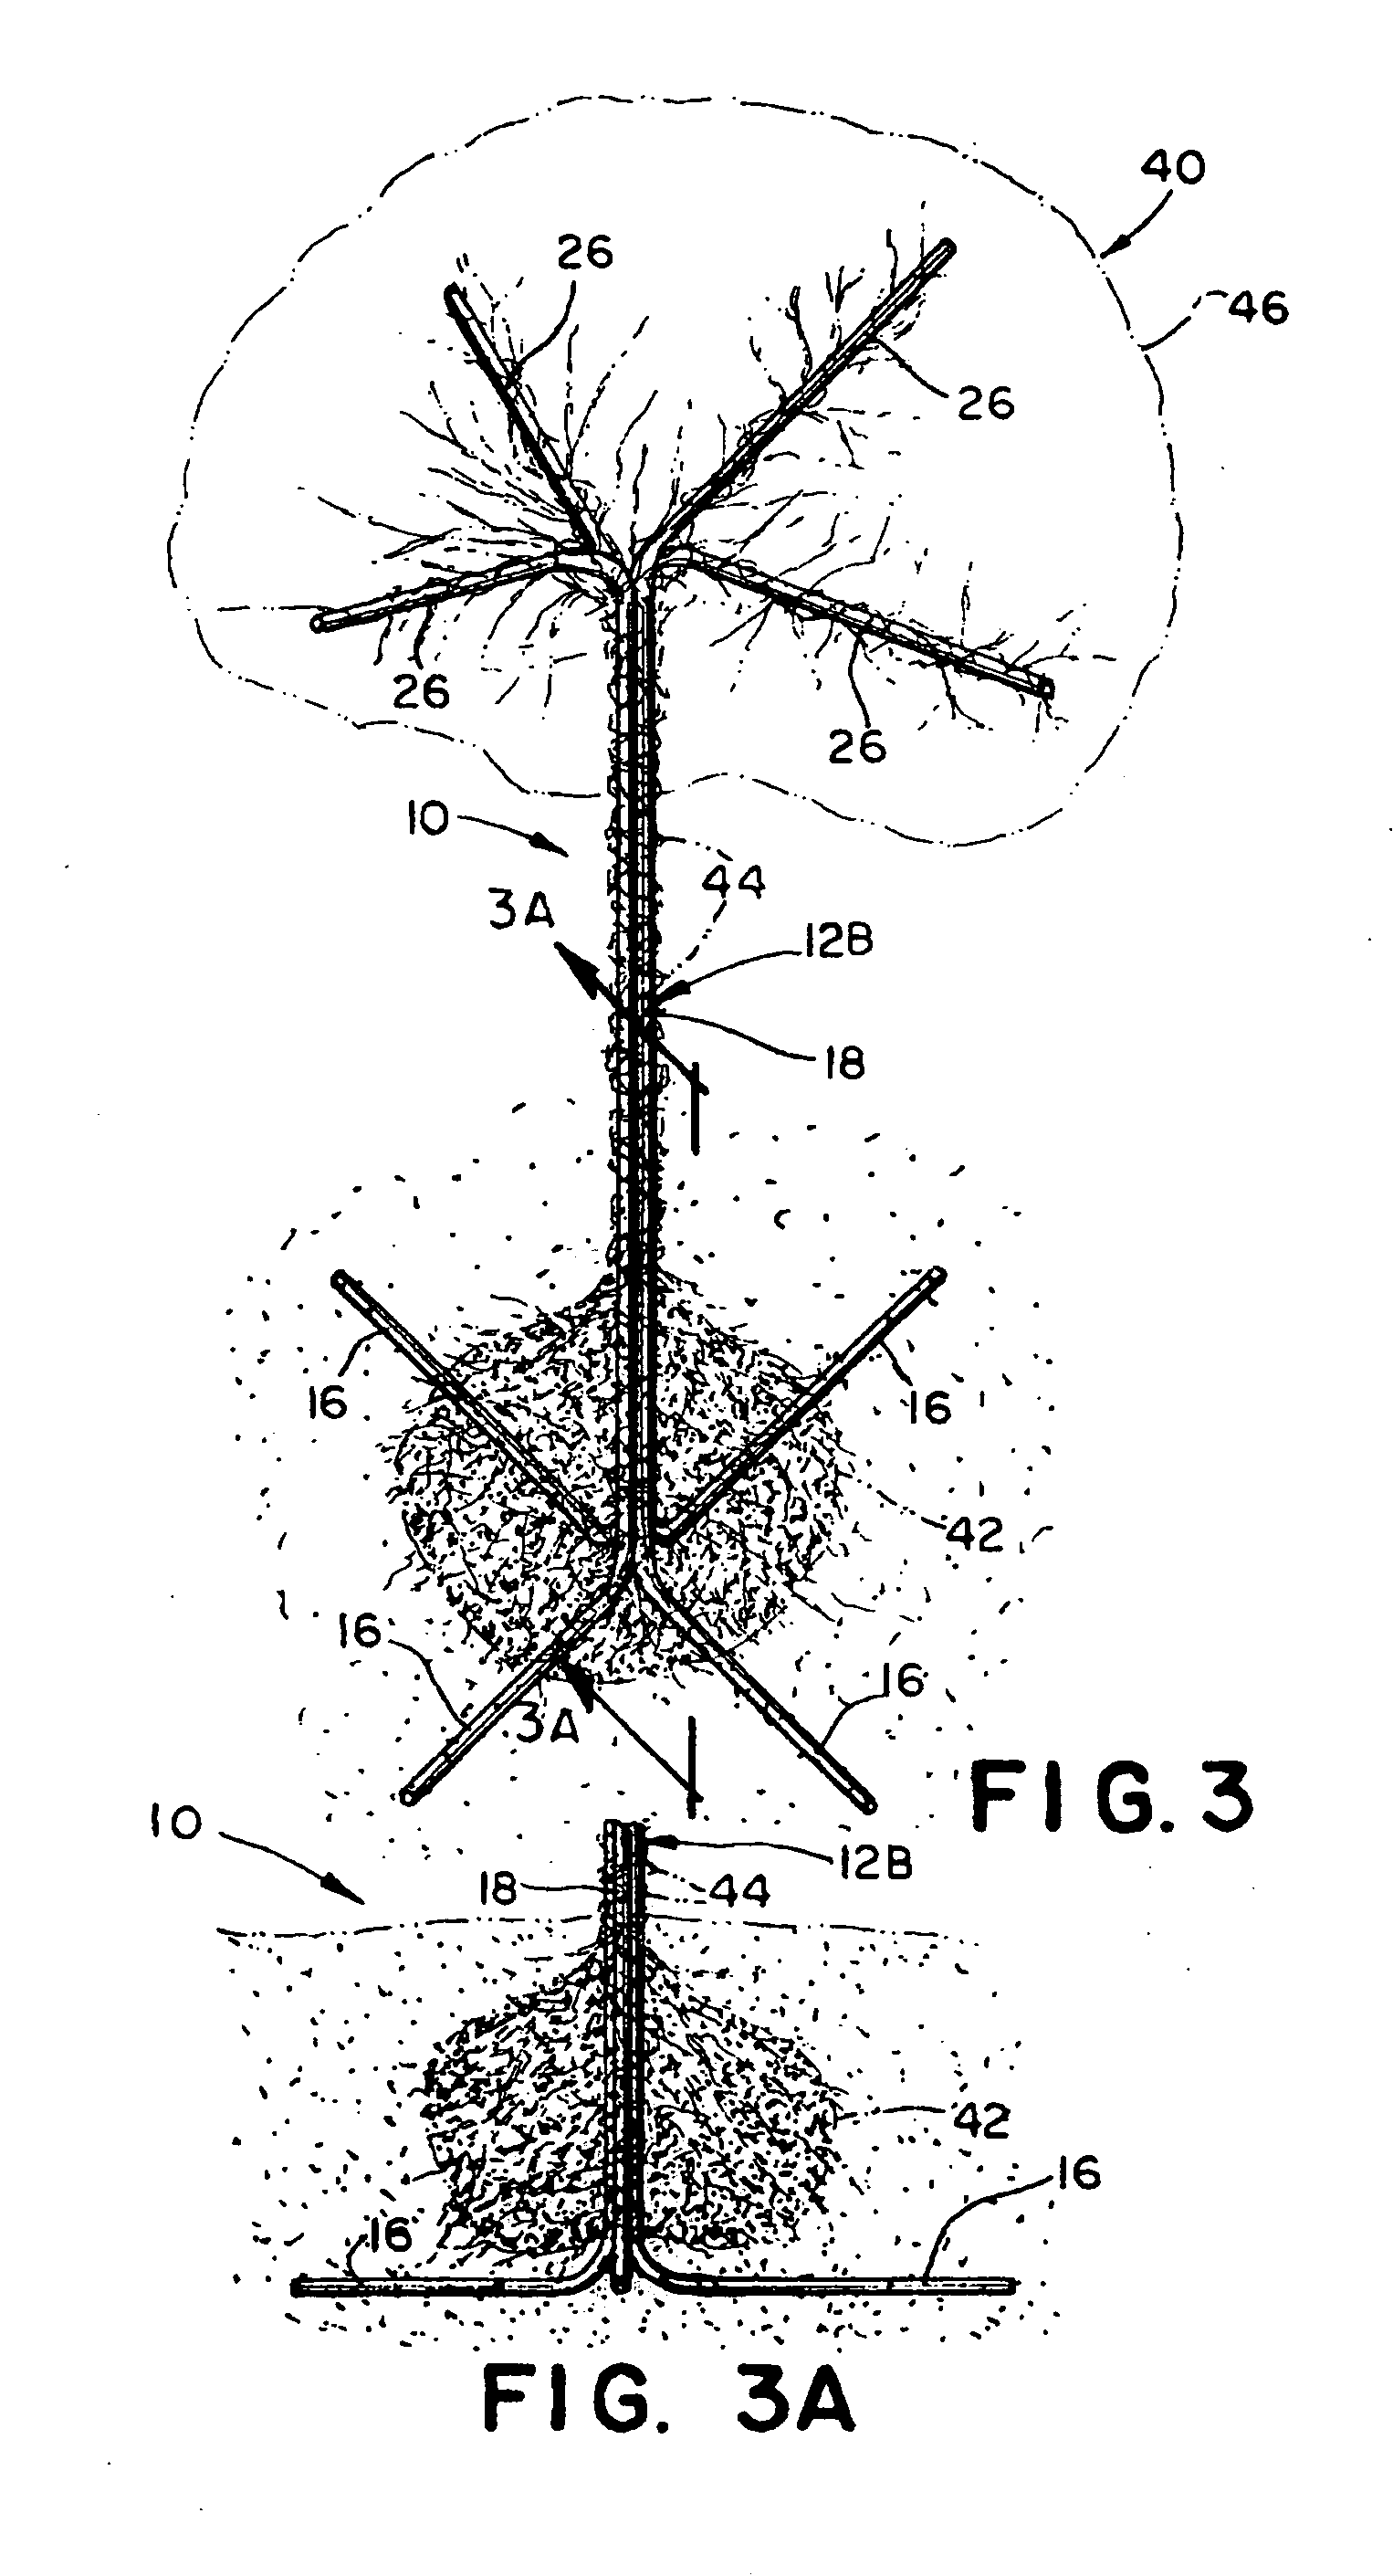 Permanent underground staking system and apparatus for vines and weakly rooted trees